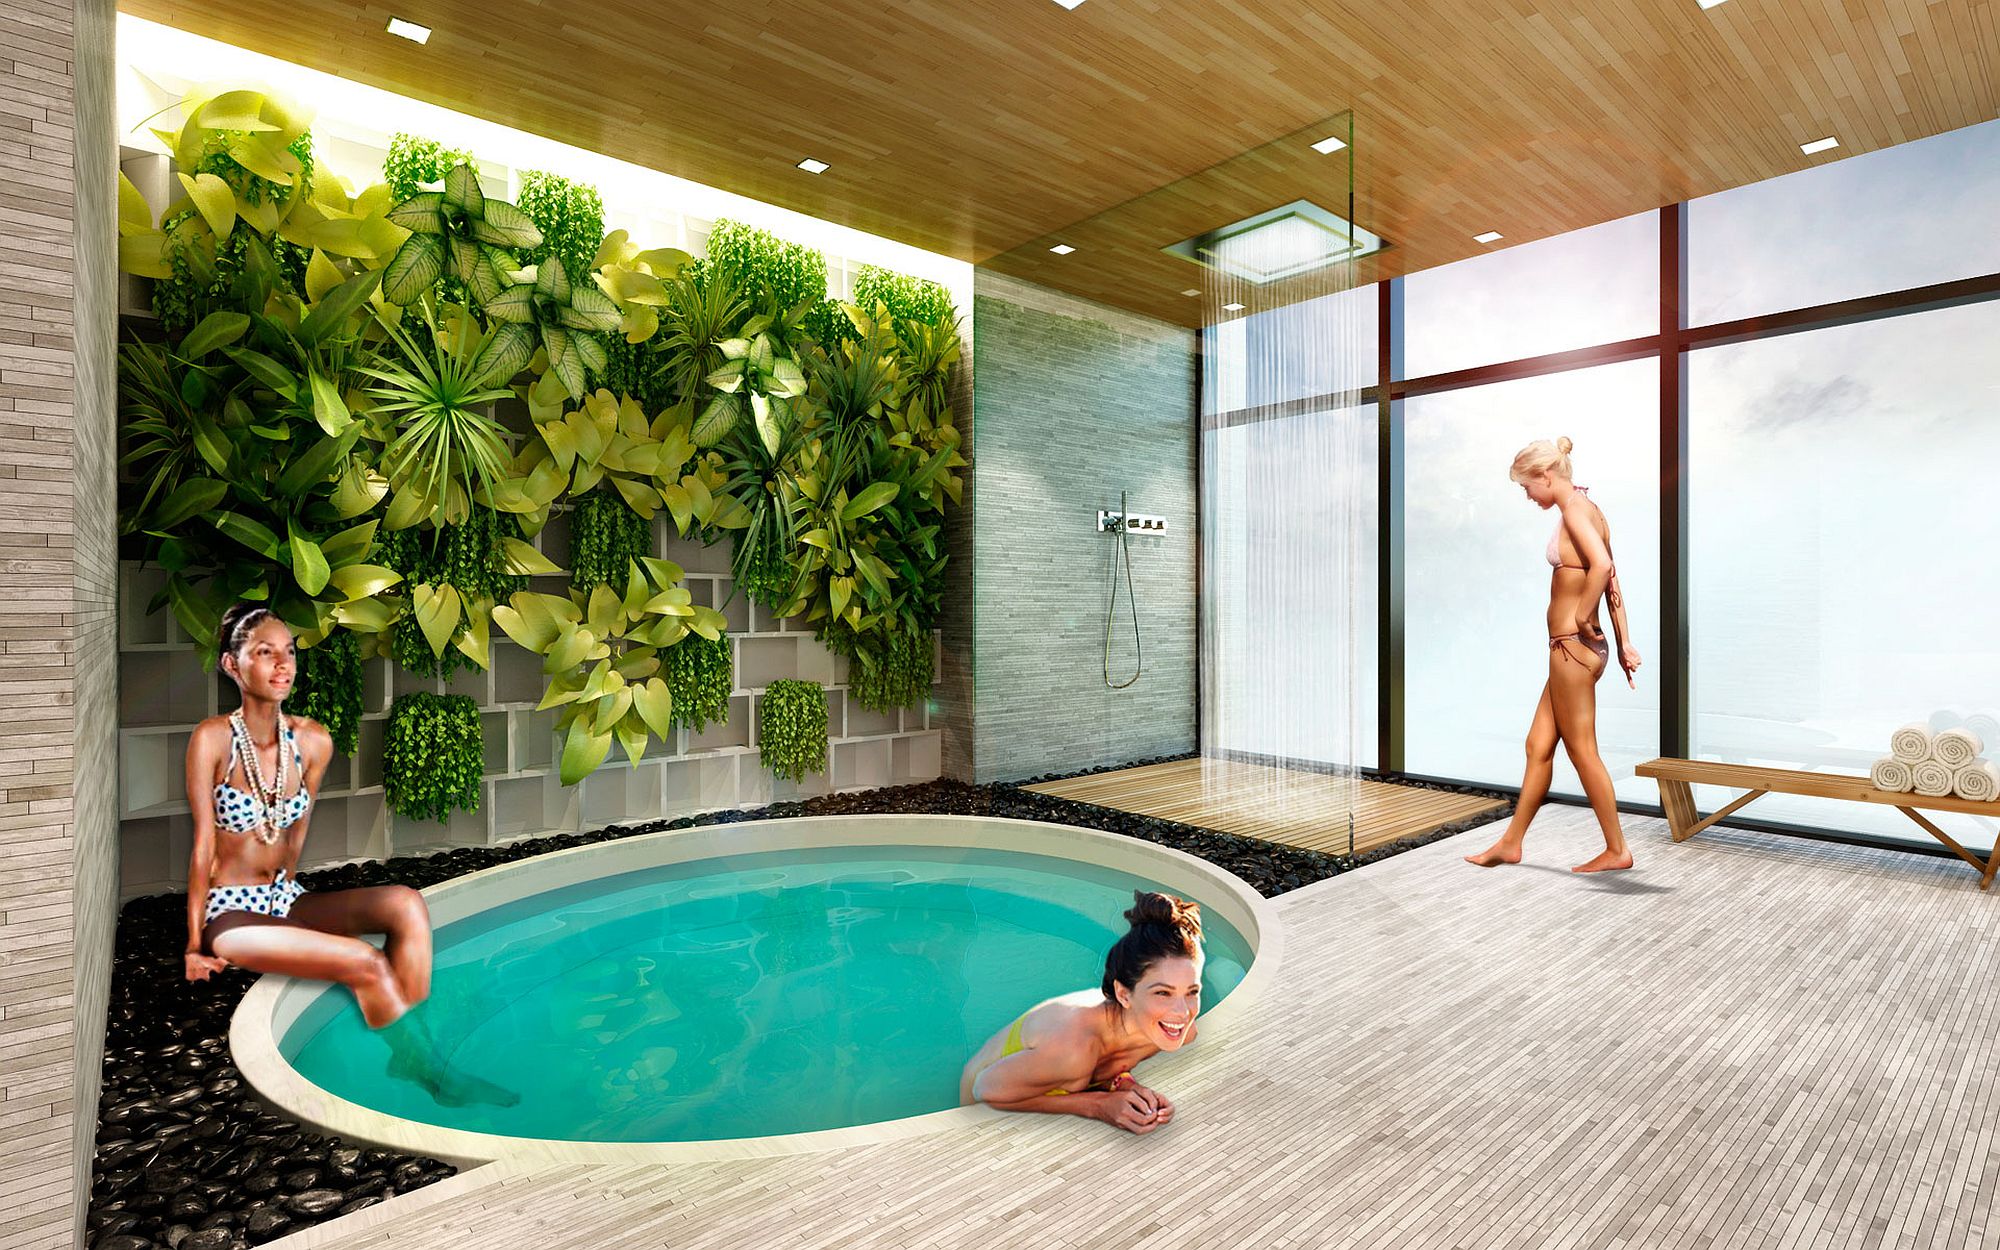 Rejuvinating spa set against a green backdrop at Brickell Heights